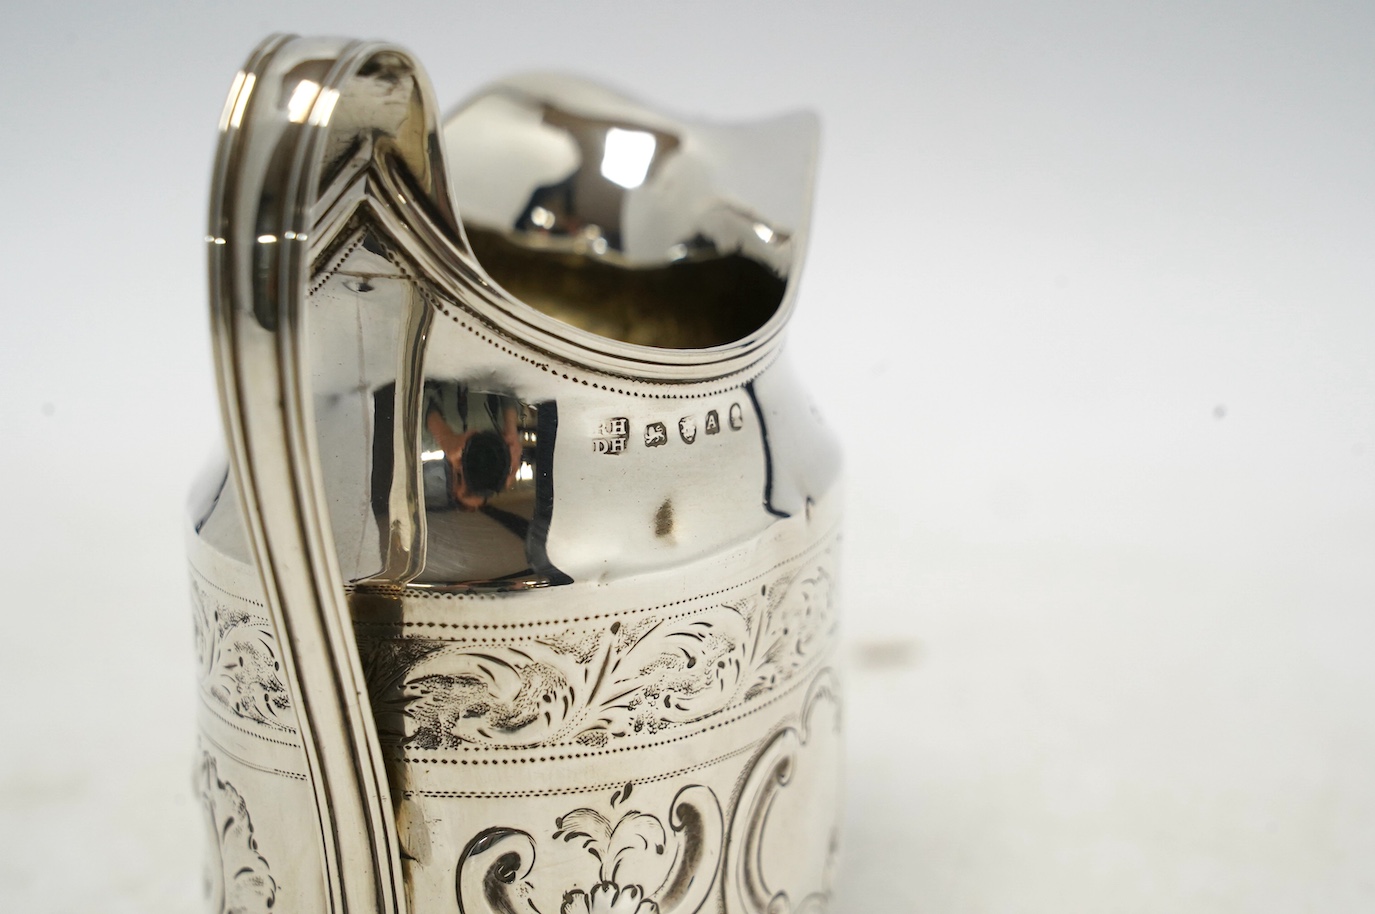 A George III silver cream jug, with later decoration, Robert & David Hennell, London, 1796, 10.4cm, 3.5oz. Condition - poor to fair